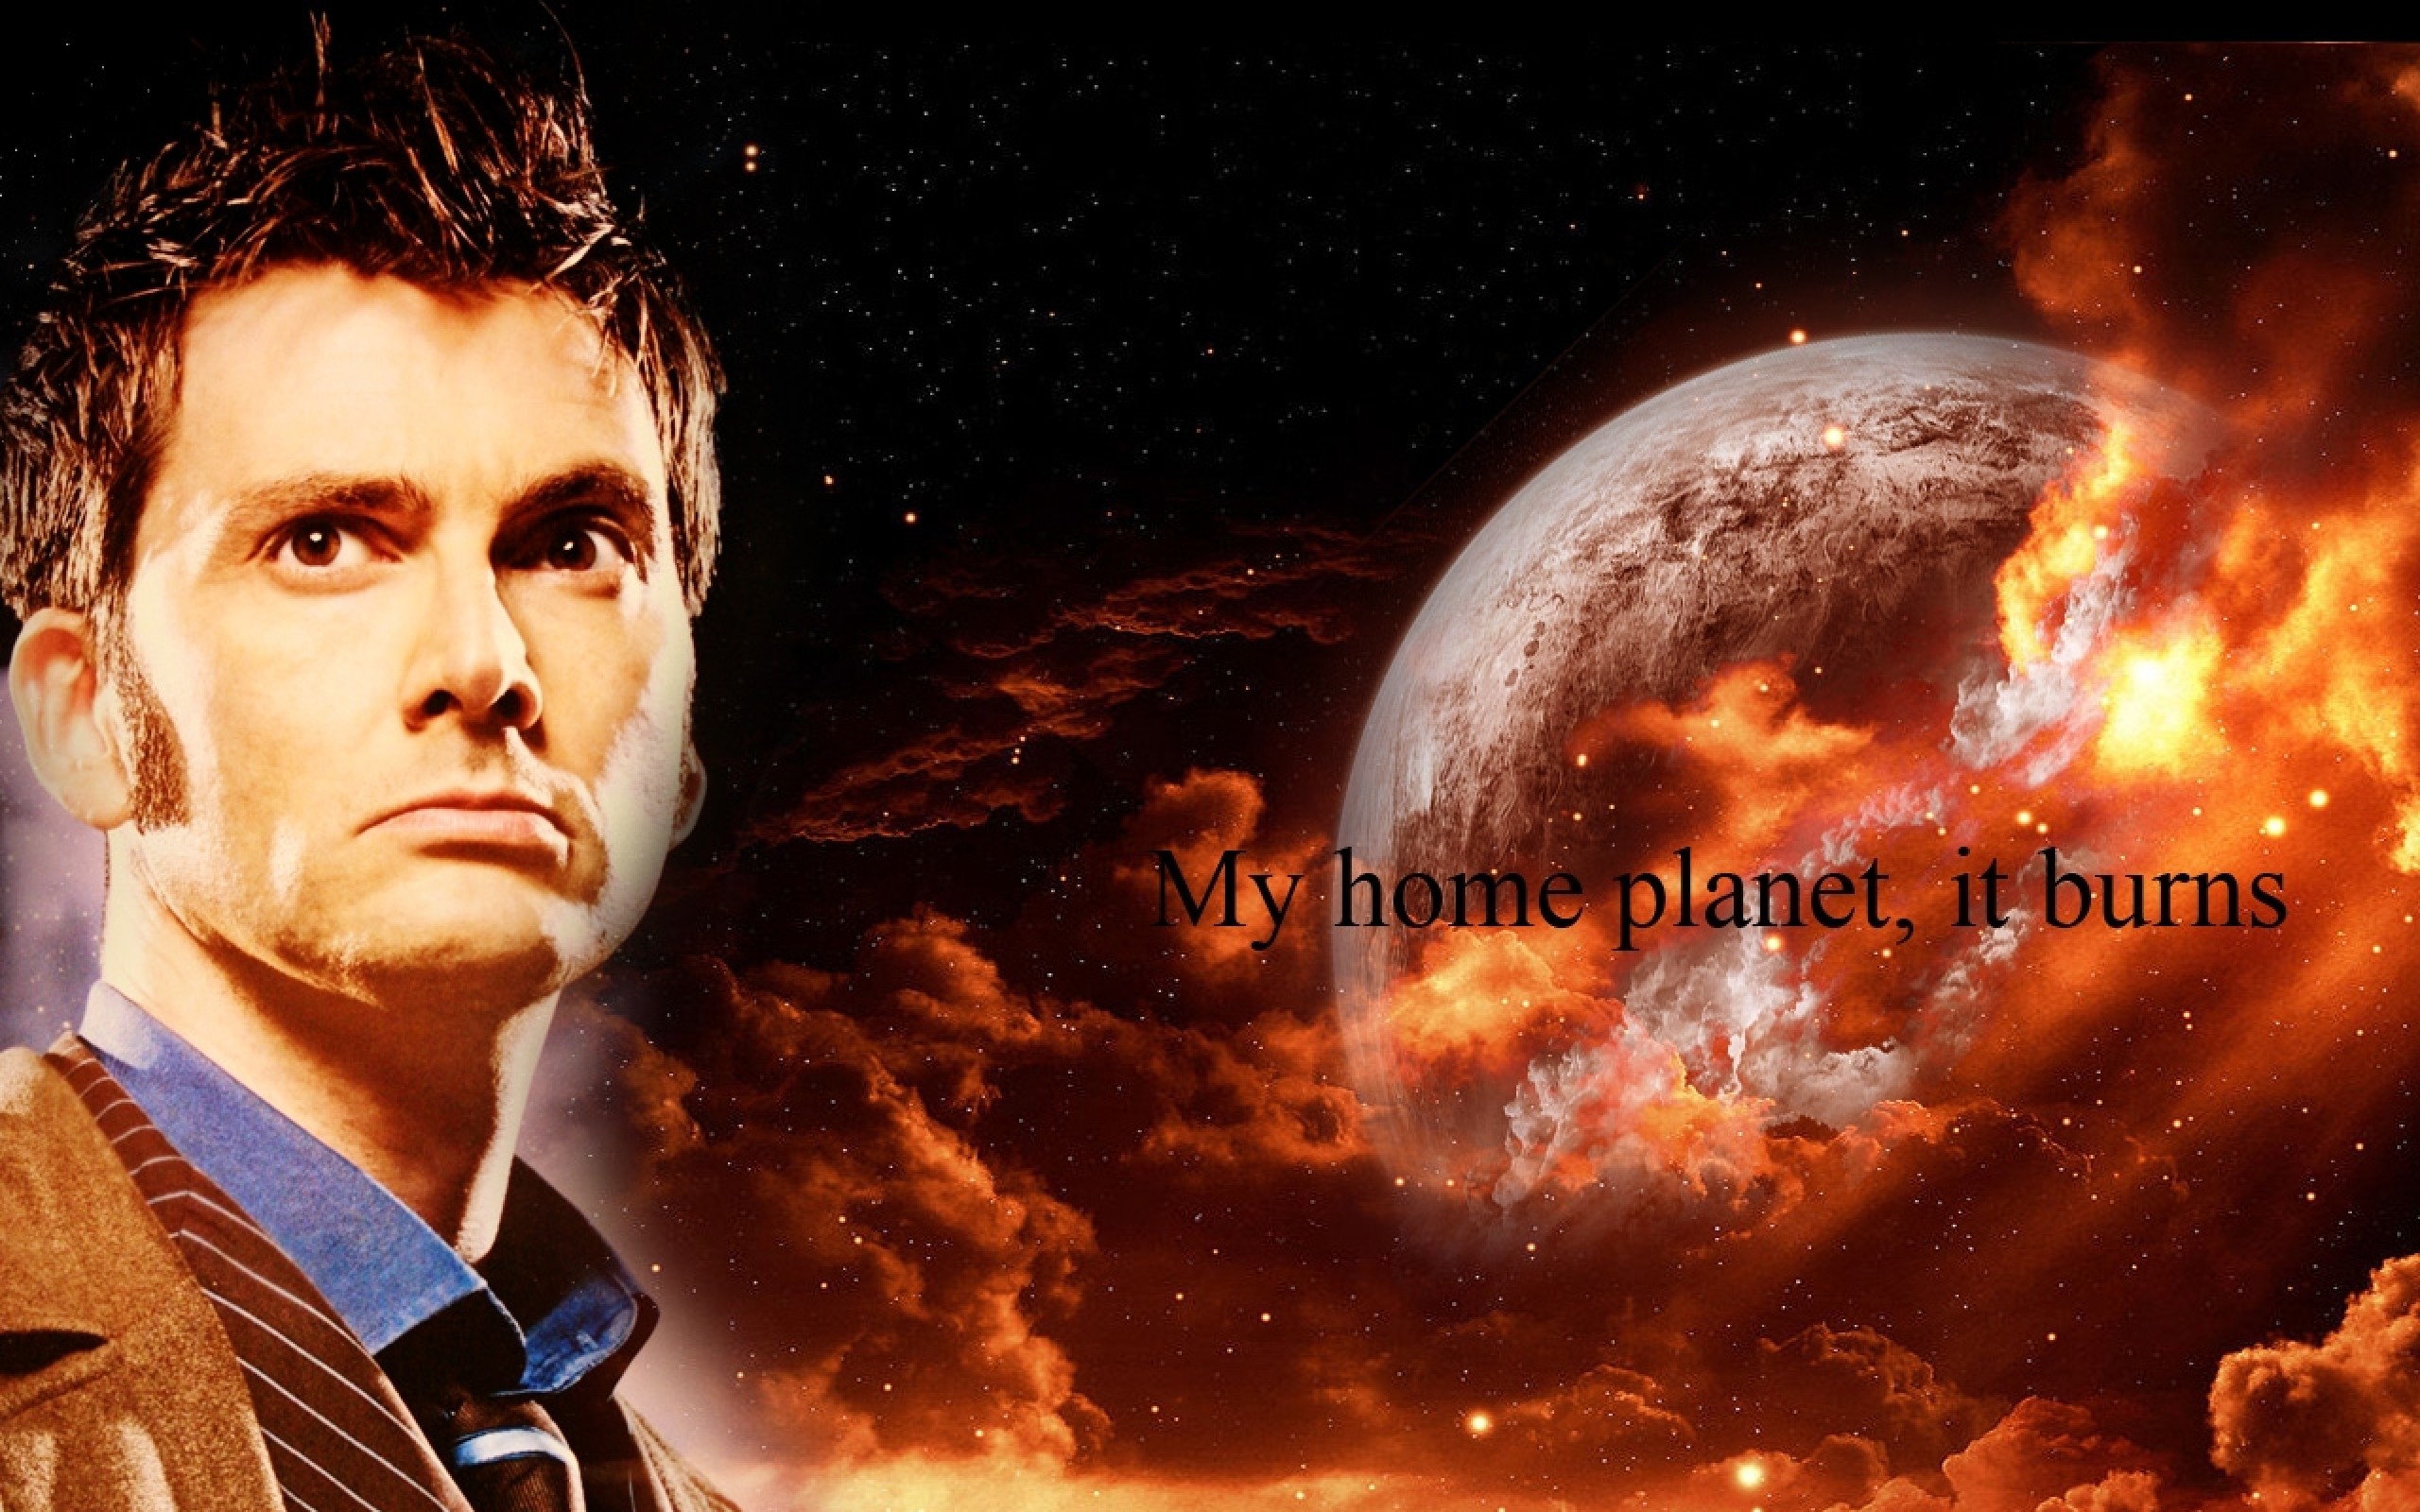 Doctor Who The Doctor TARDiS David Tennant Gallifrey Tenth Doctor Planet Quote 2560x1600